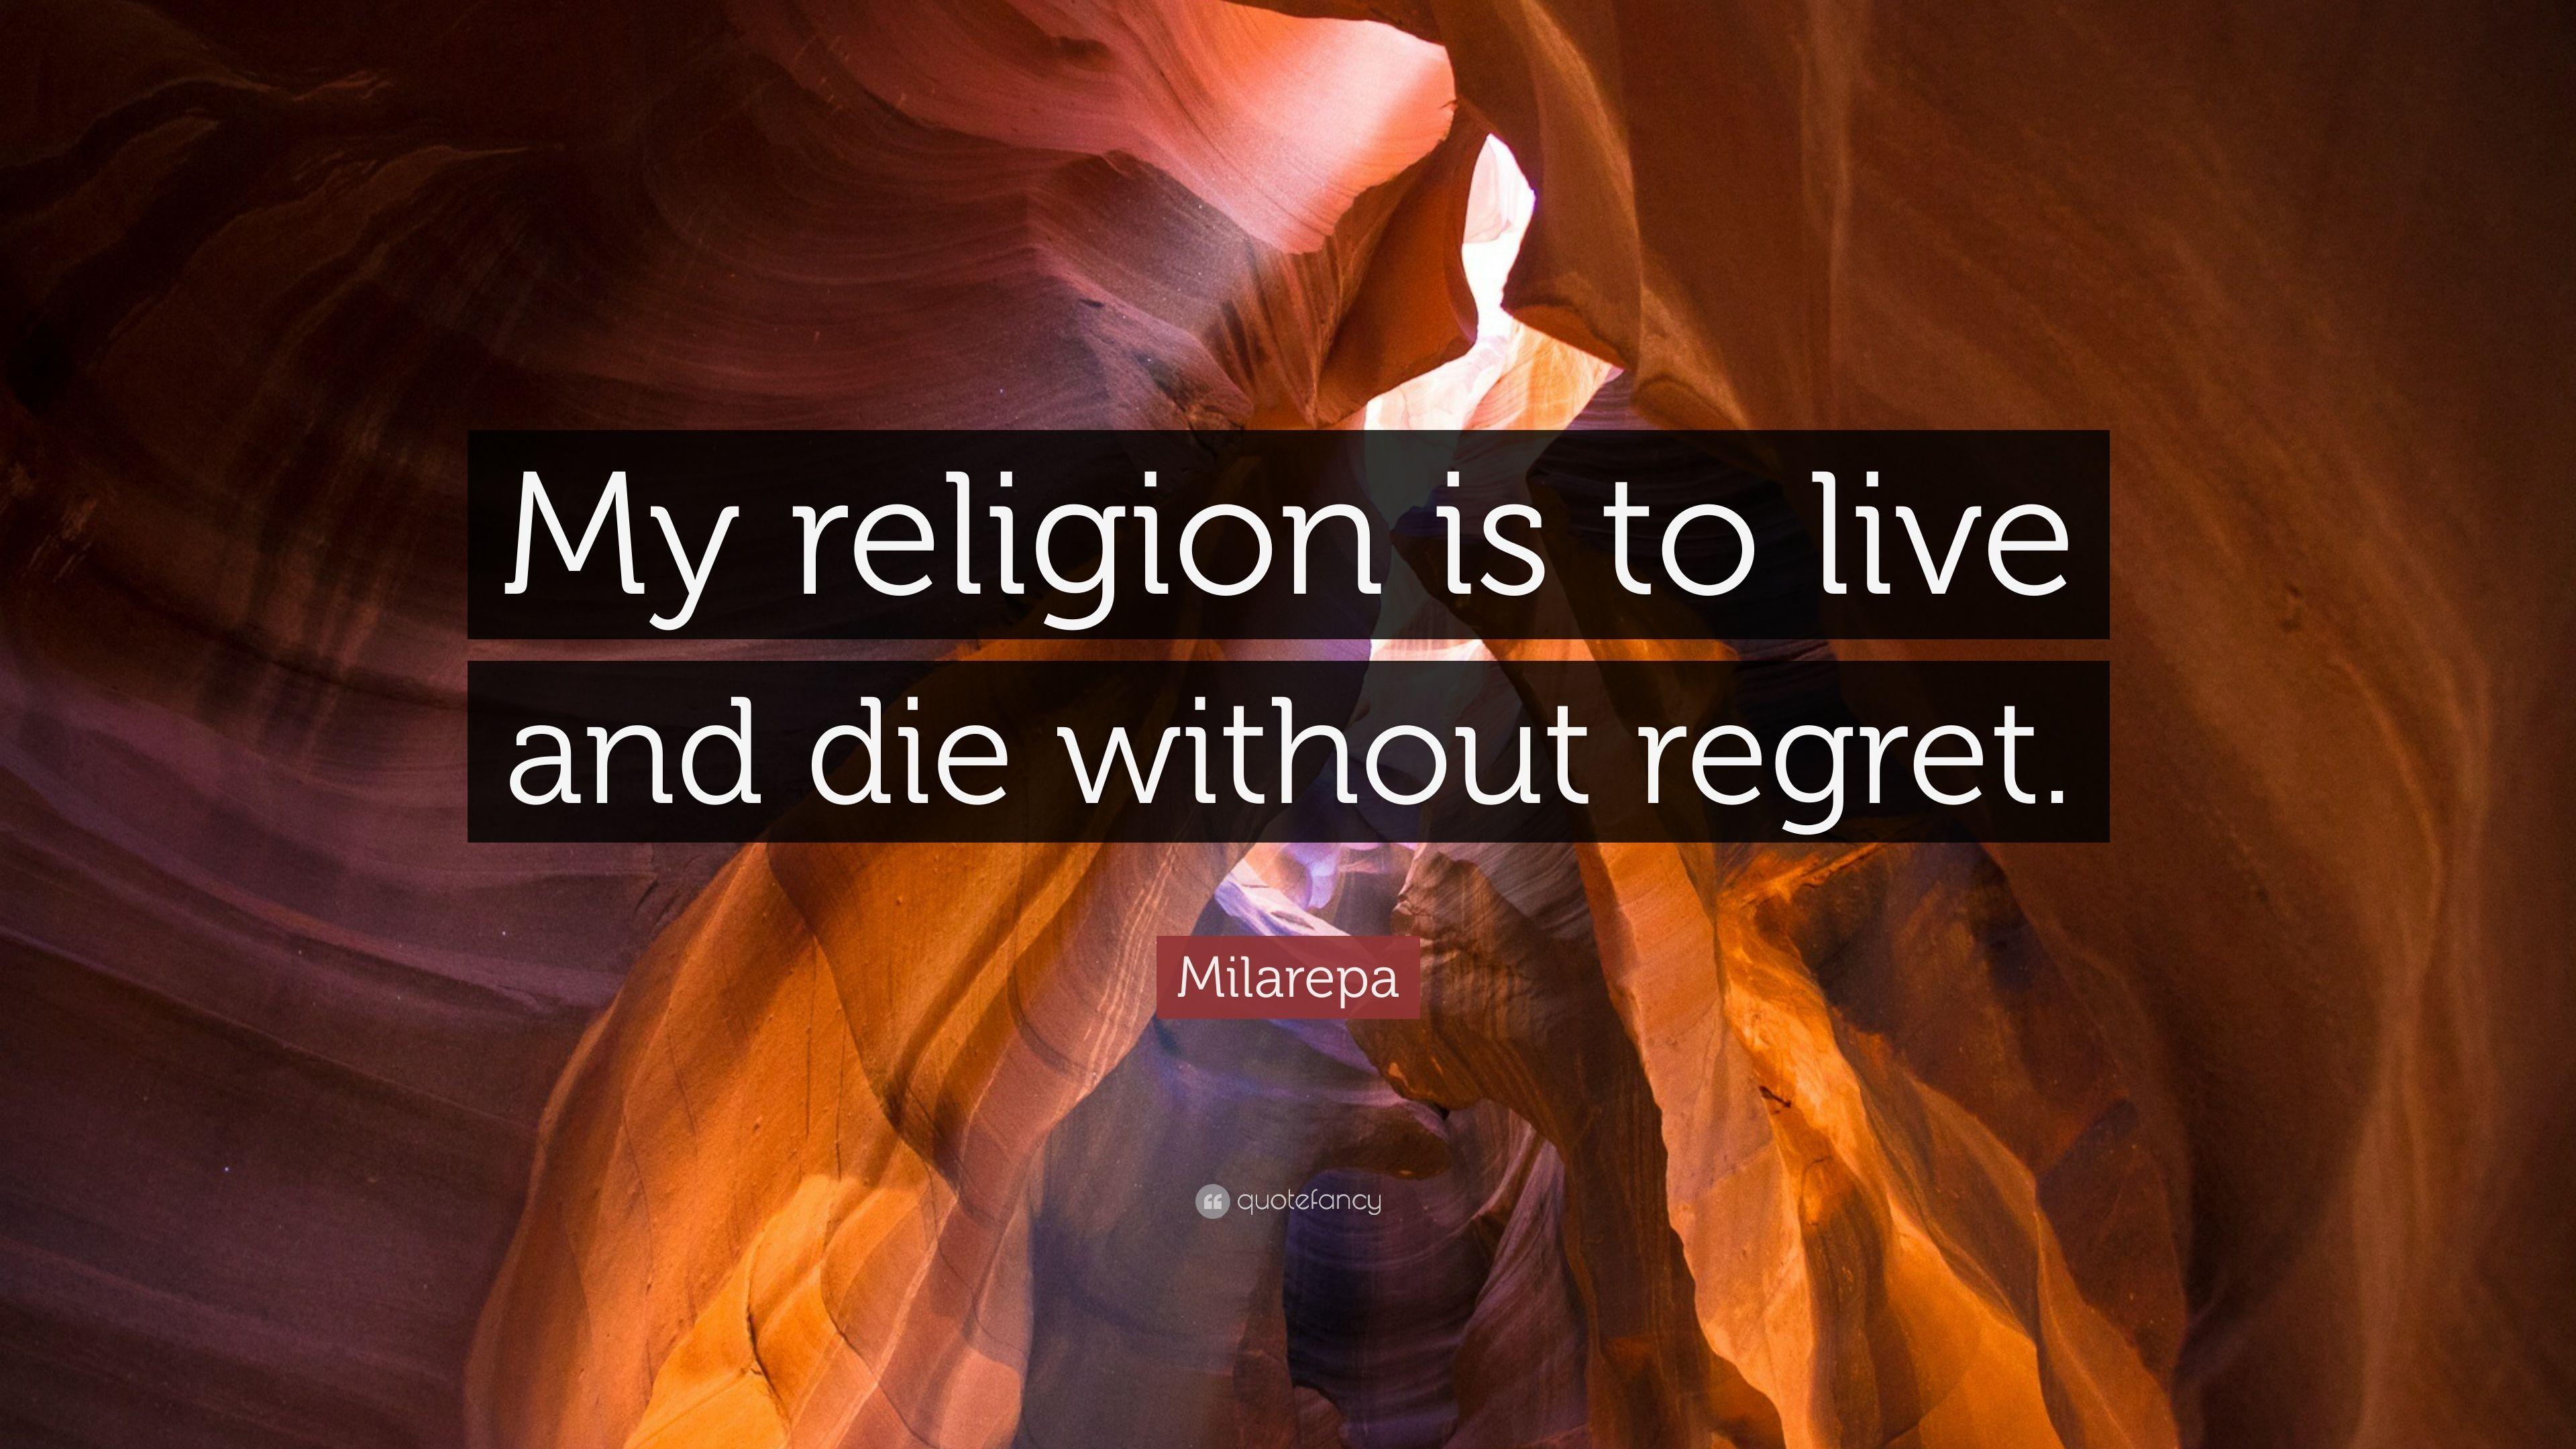 Milarepa Quote: “My religion is to live and die without regret.” 12